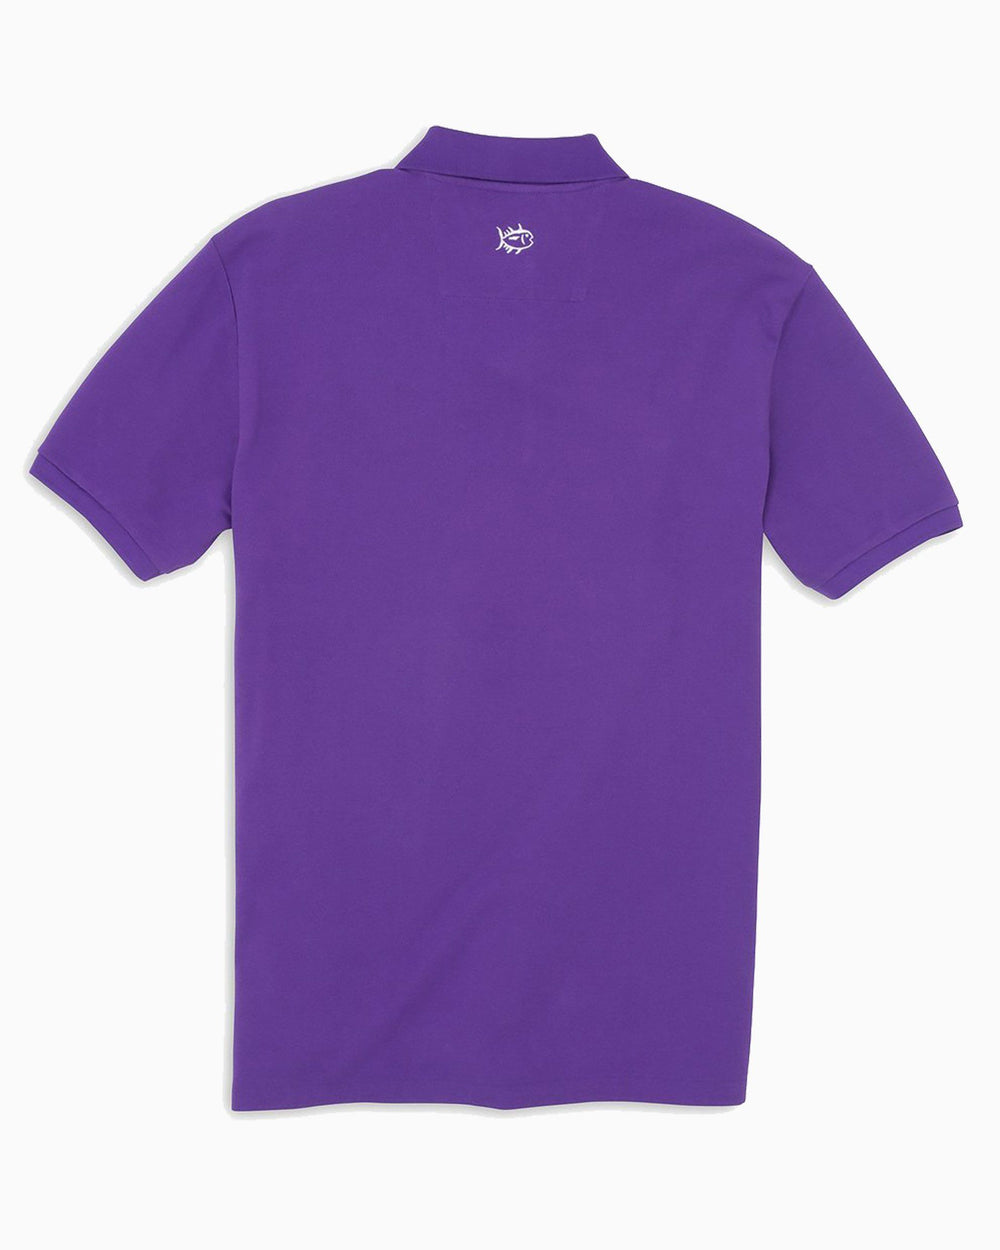 The back view of the Men's Purple Furman Pique Polo Shirt by Southern Tide - Regal Purple